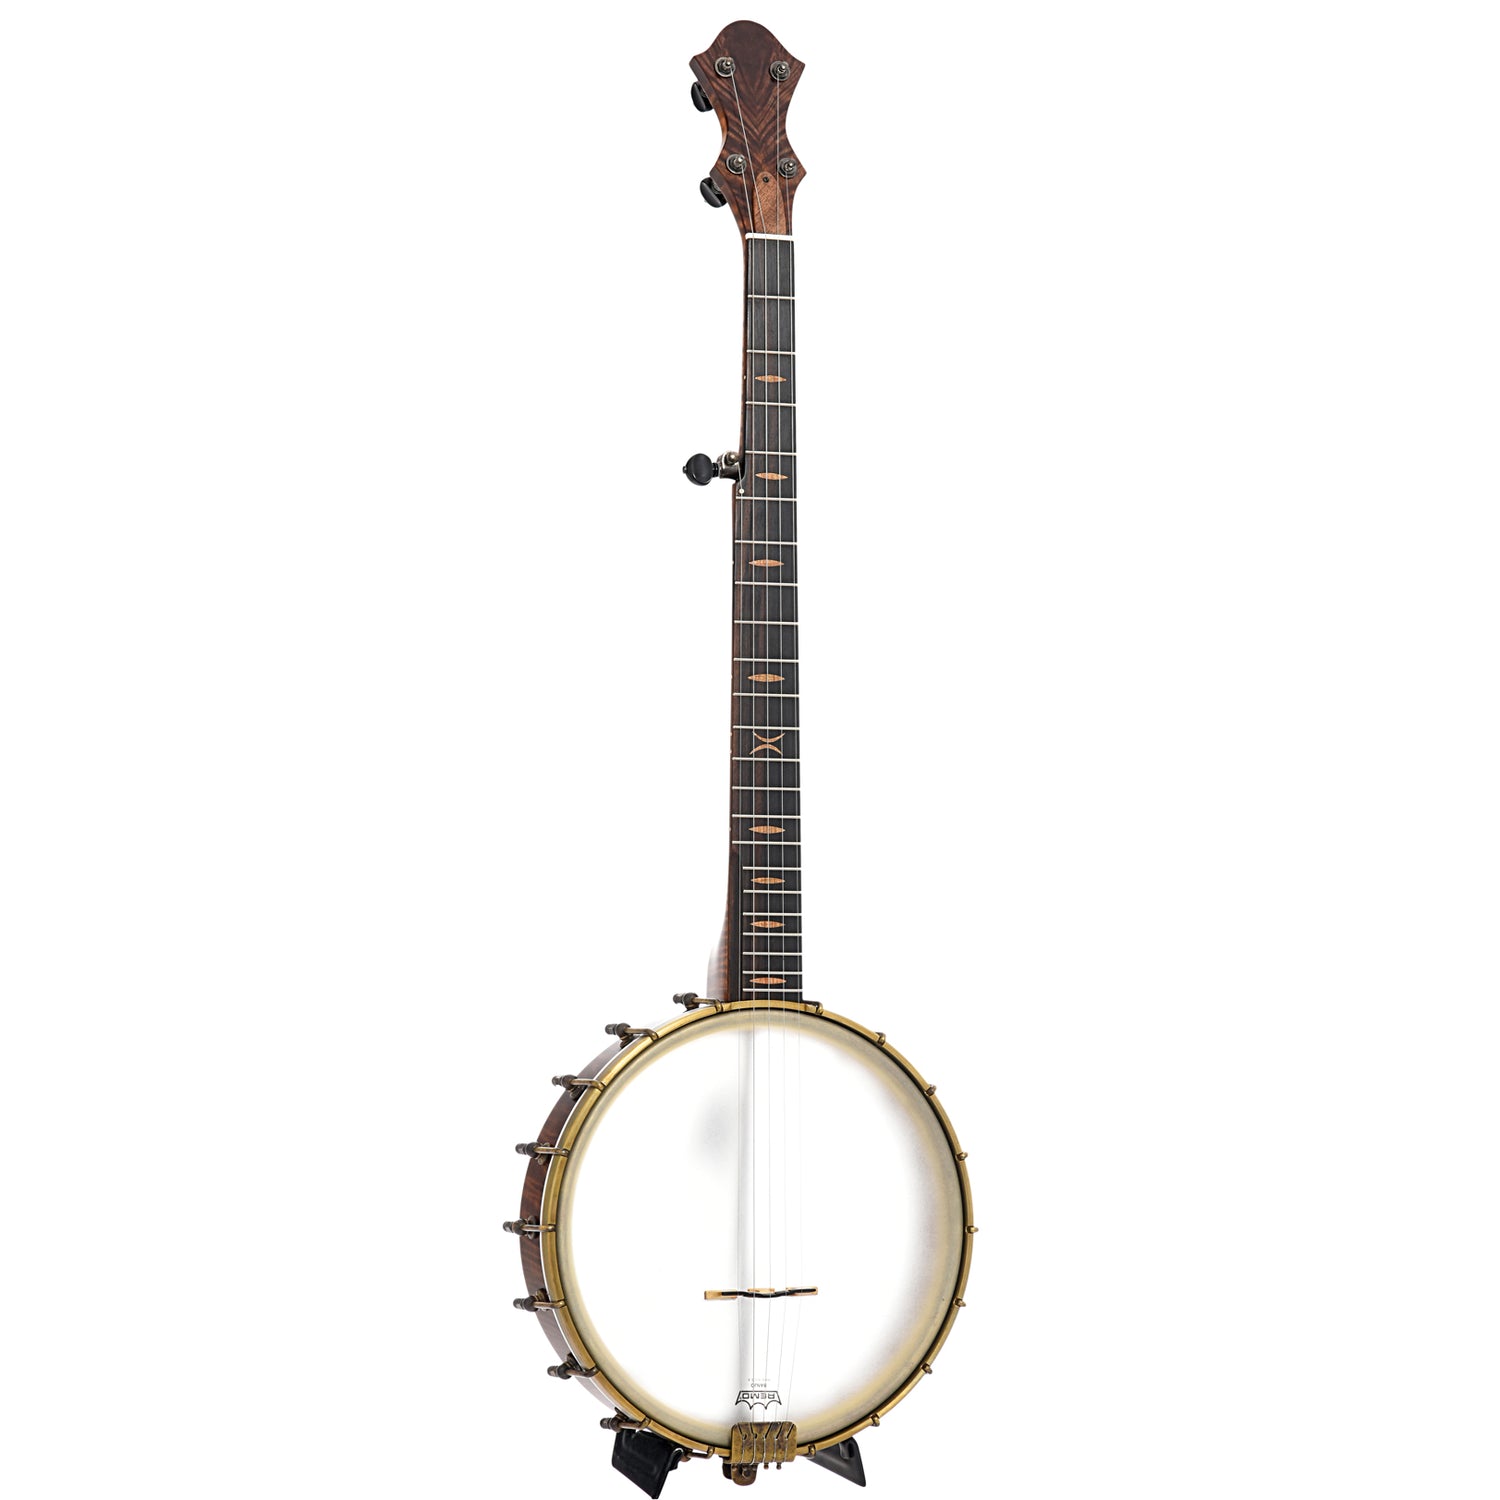 Full front and side of Curly Maple Pattison 11" Tubaphone Banjo